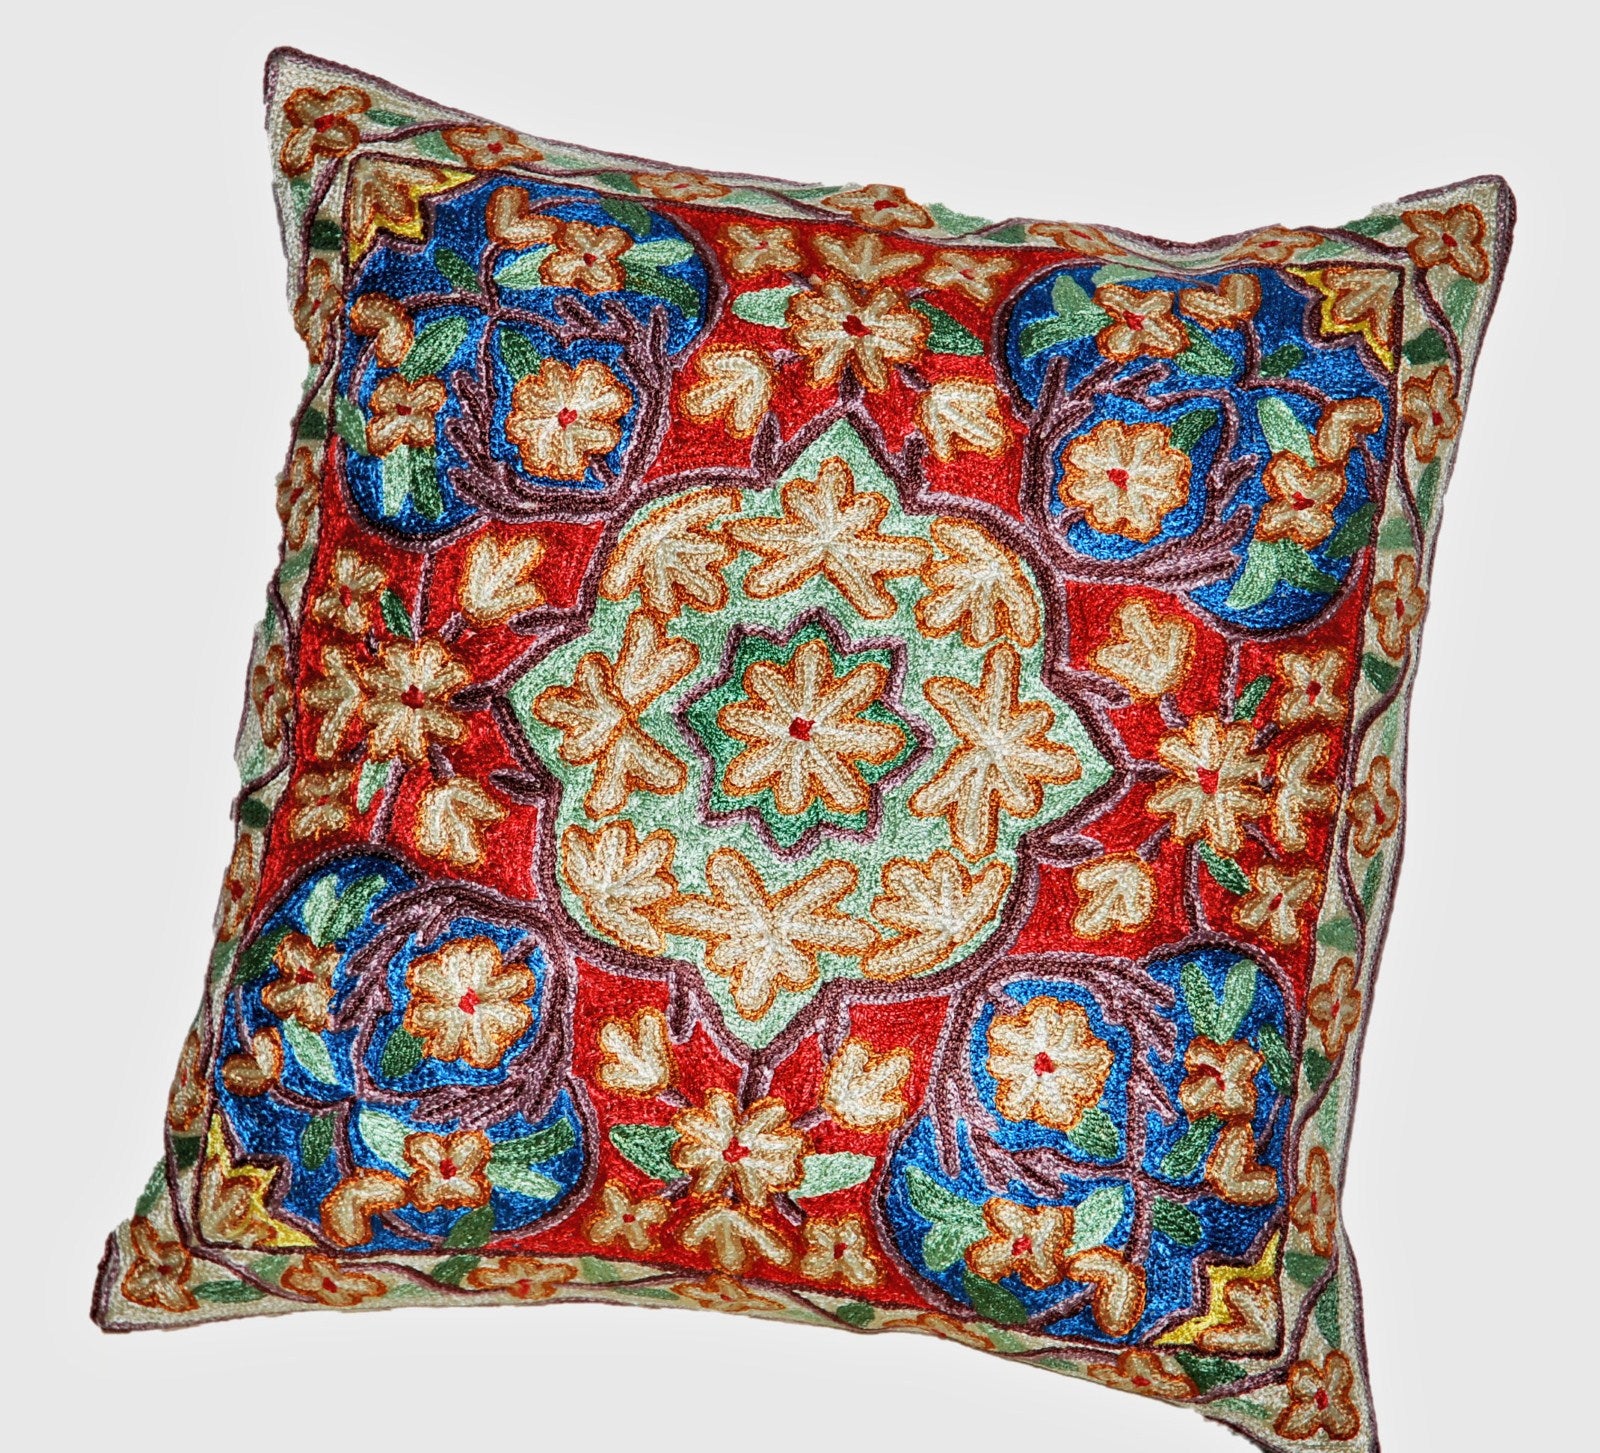 Crewel Silk Embroidered Cushion Throw Pillow Cover, Multicolor #CW2016